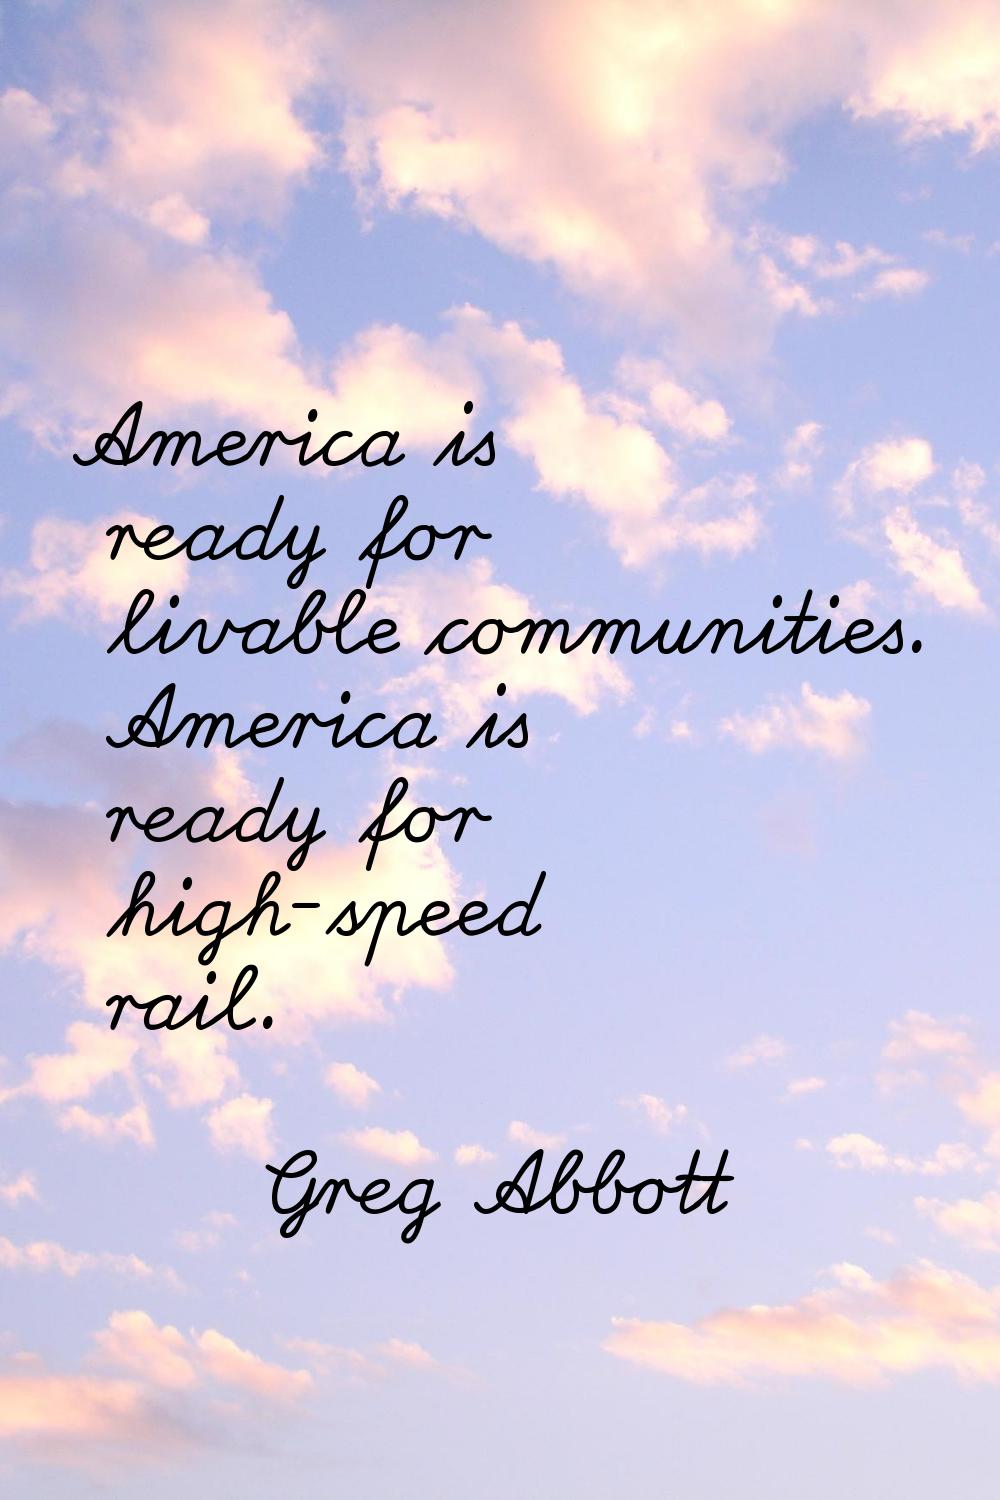 America is ready for livable communities. America is ready for high-speed rail.